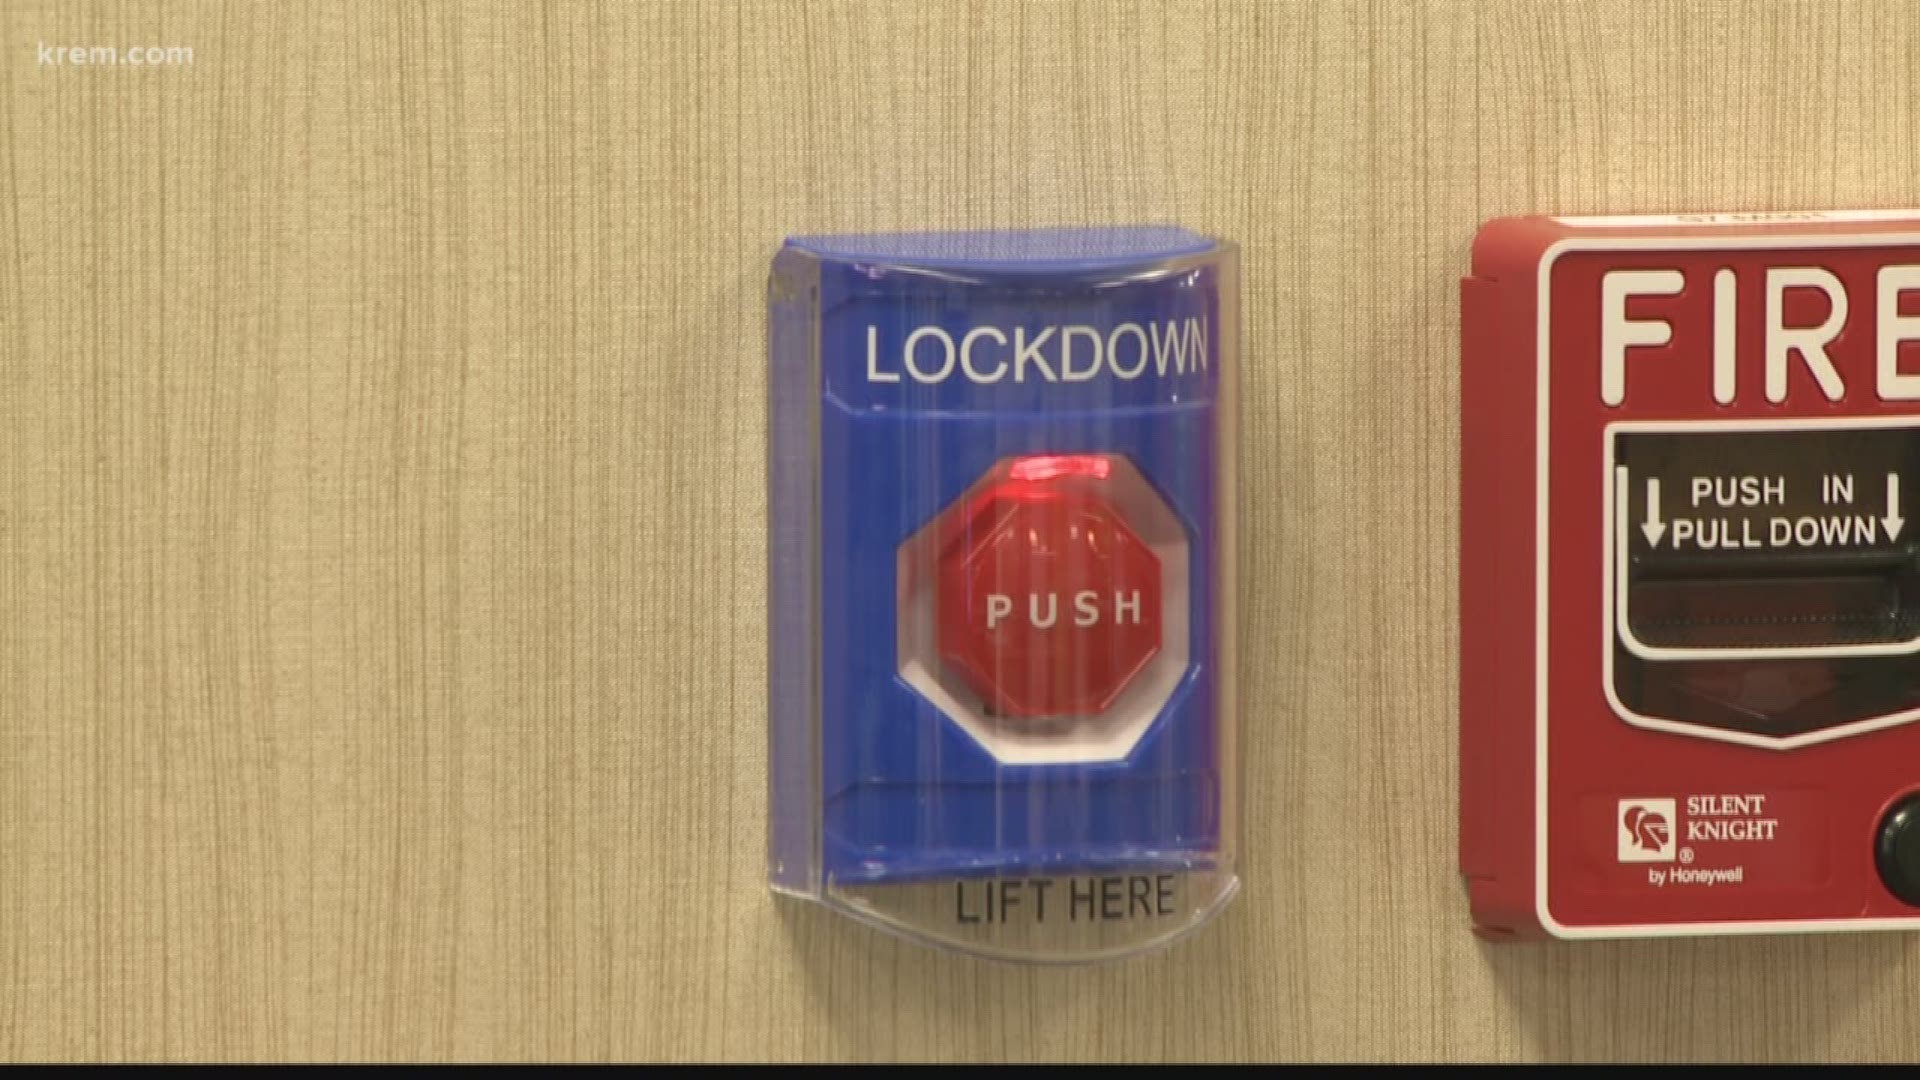 As KREM 2's Mark Hanrahan found out, a big focus of the new buildings is security.